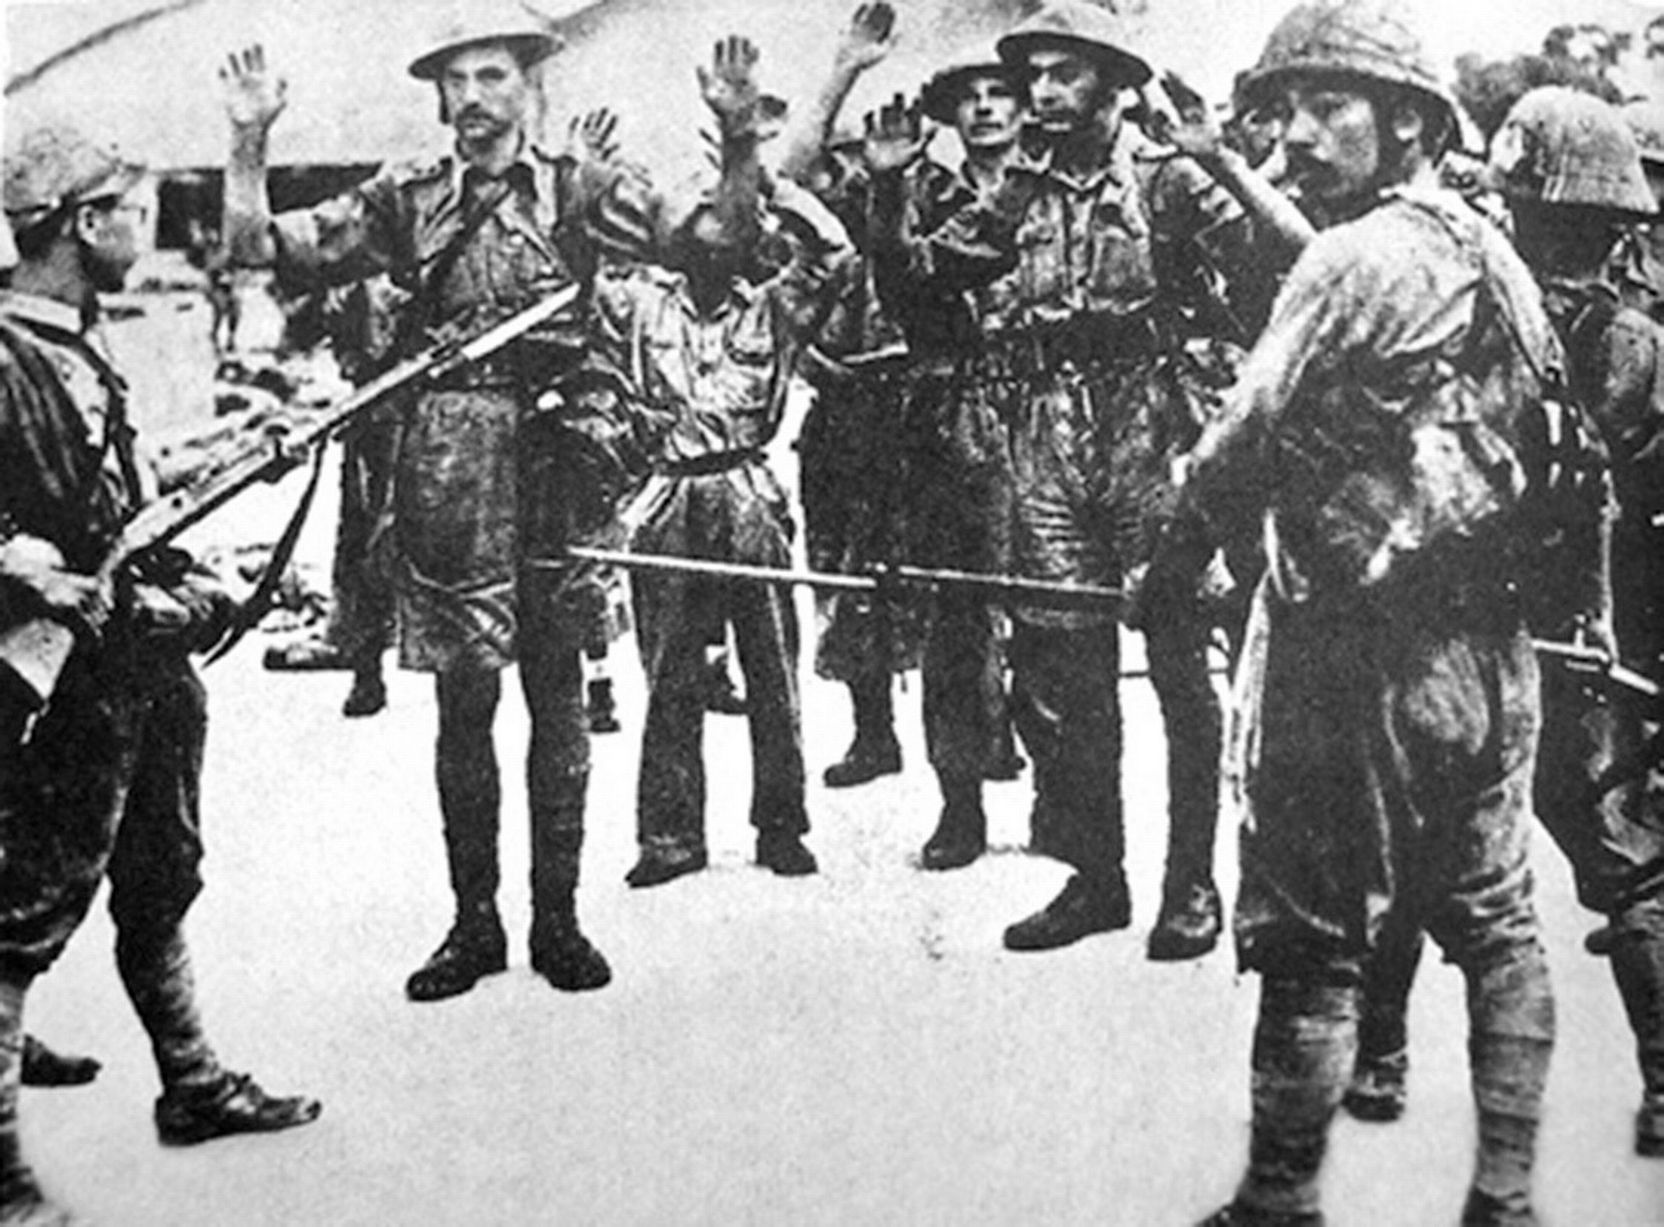 British troops that surrendered being held at gunpoint. Image from Pinterest 